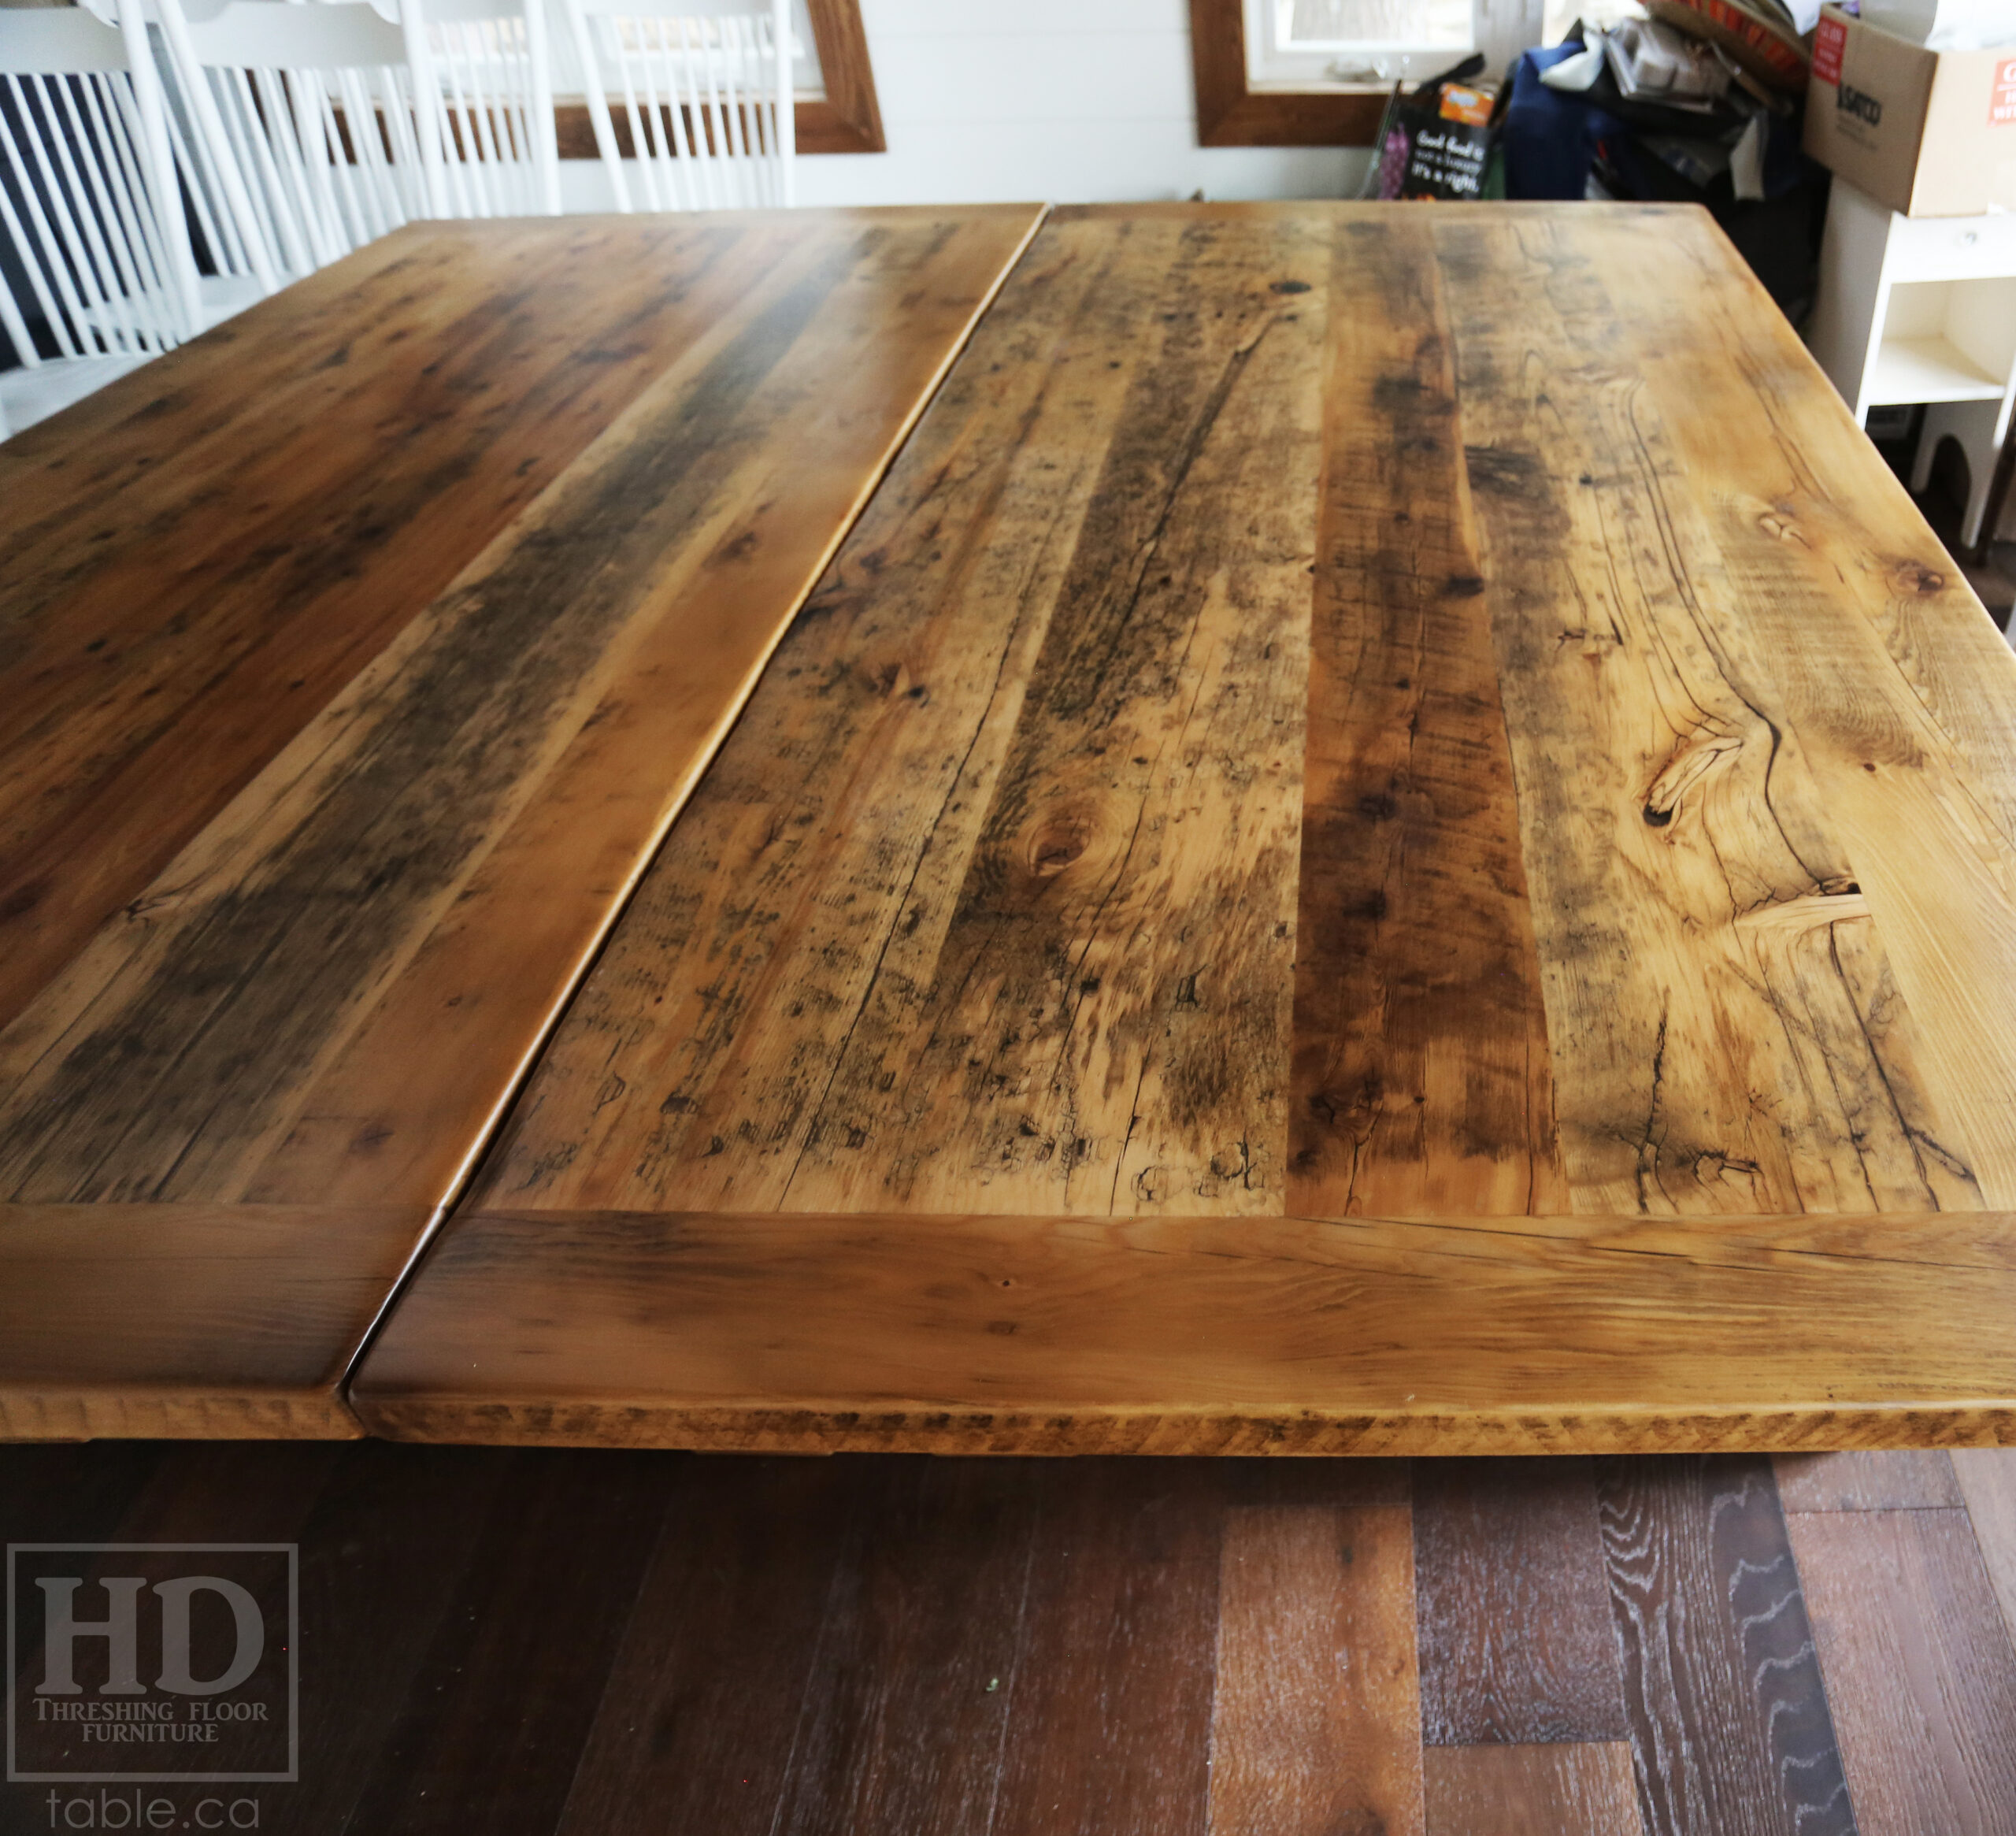 [2] 7’ Ontario Barnwood Tables we made for a Gravenhurst, Ontario home – 42” wide – Sawbuck Bases - Reclaimed Hemlock Threshing Floor Construction – Original distressing & edges maintained – Premium epoxy + matte polyurethane finish – Greytone Option - [2] 18” Leaves [making total length 10’ when extended] –  www.table.ca